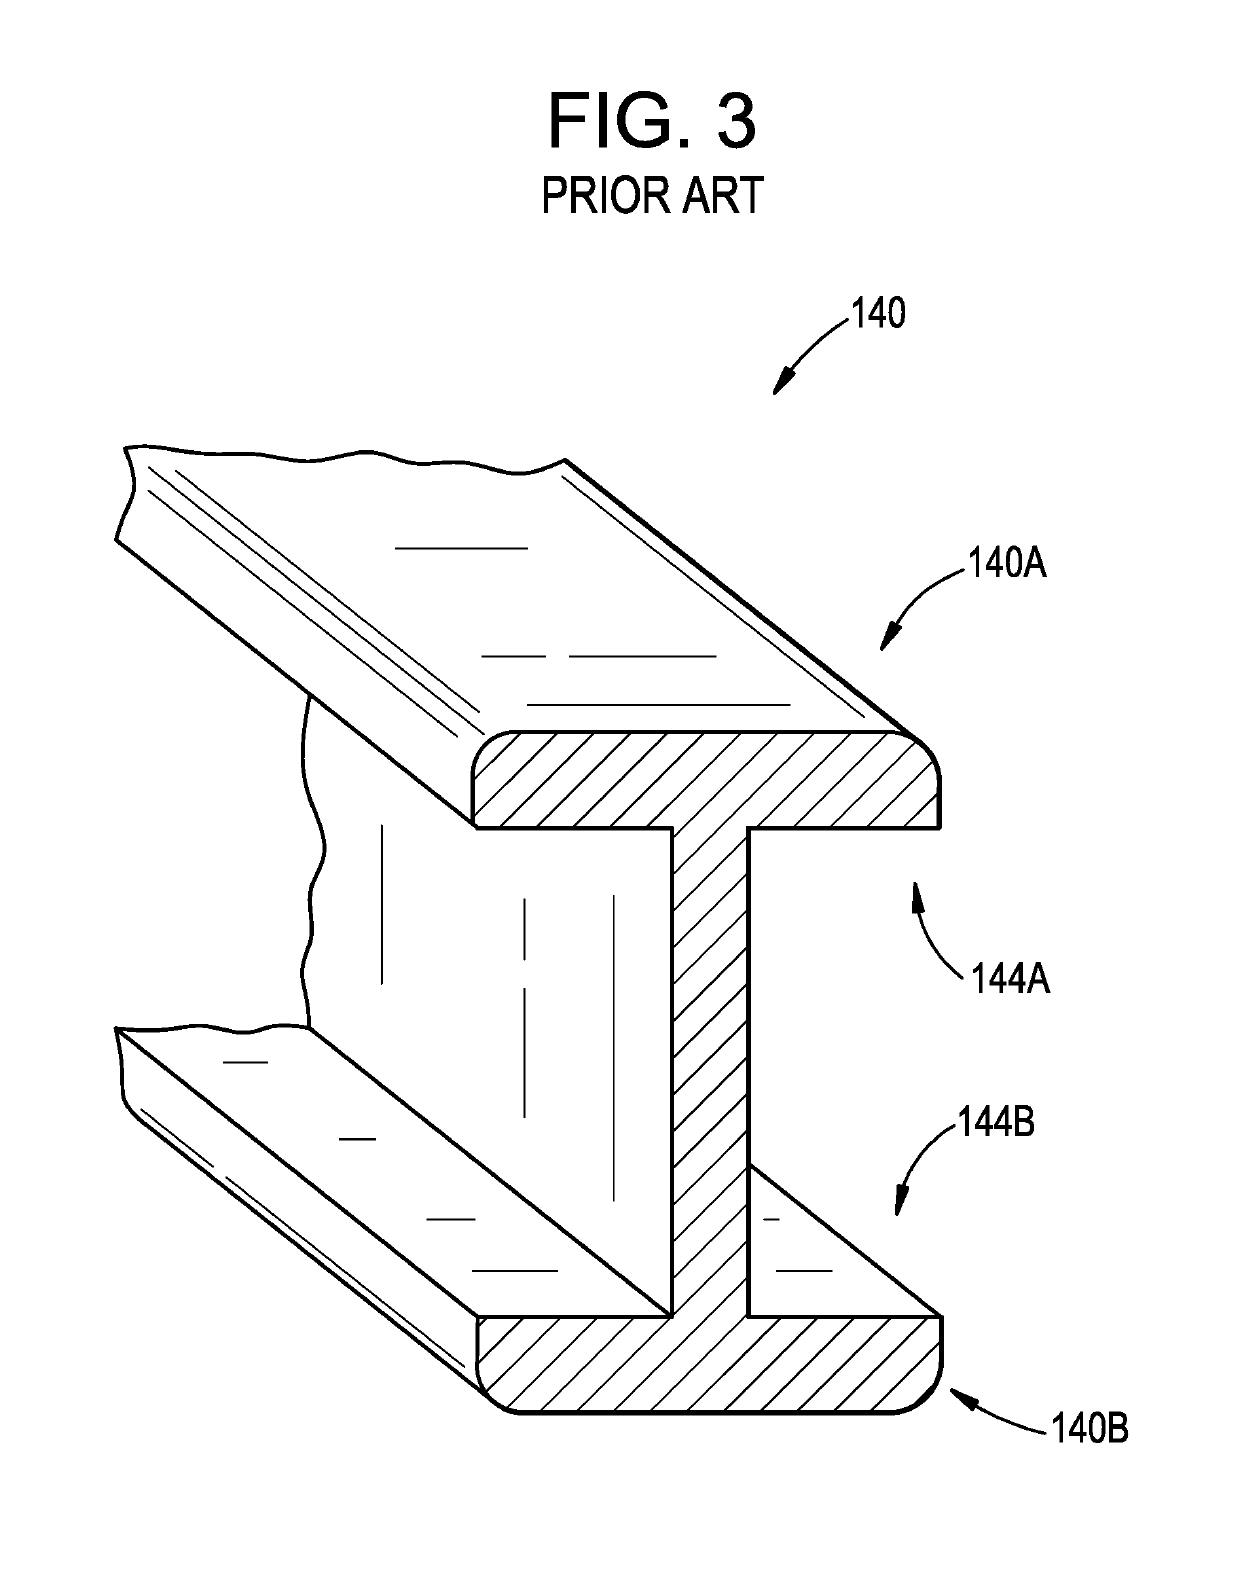 Surgical end effectors with increased stiffness